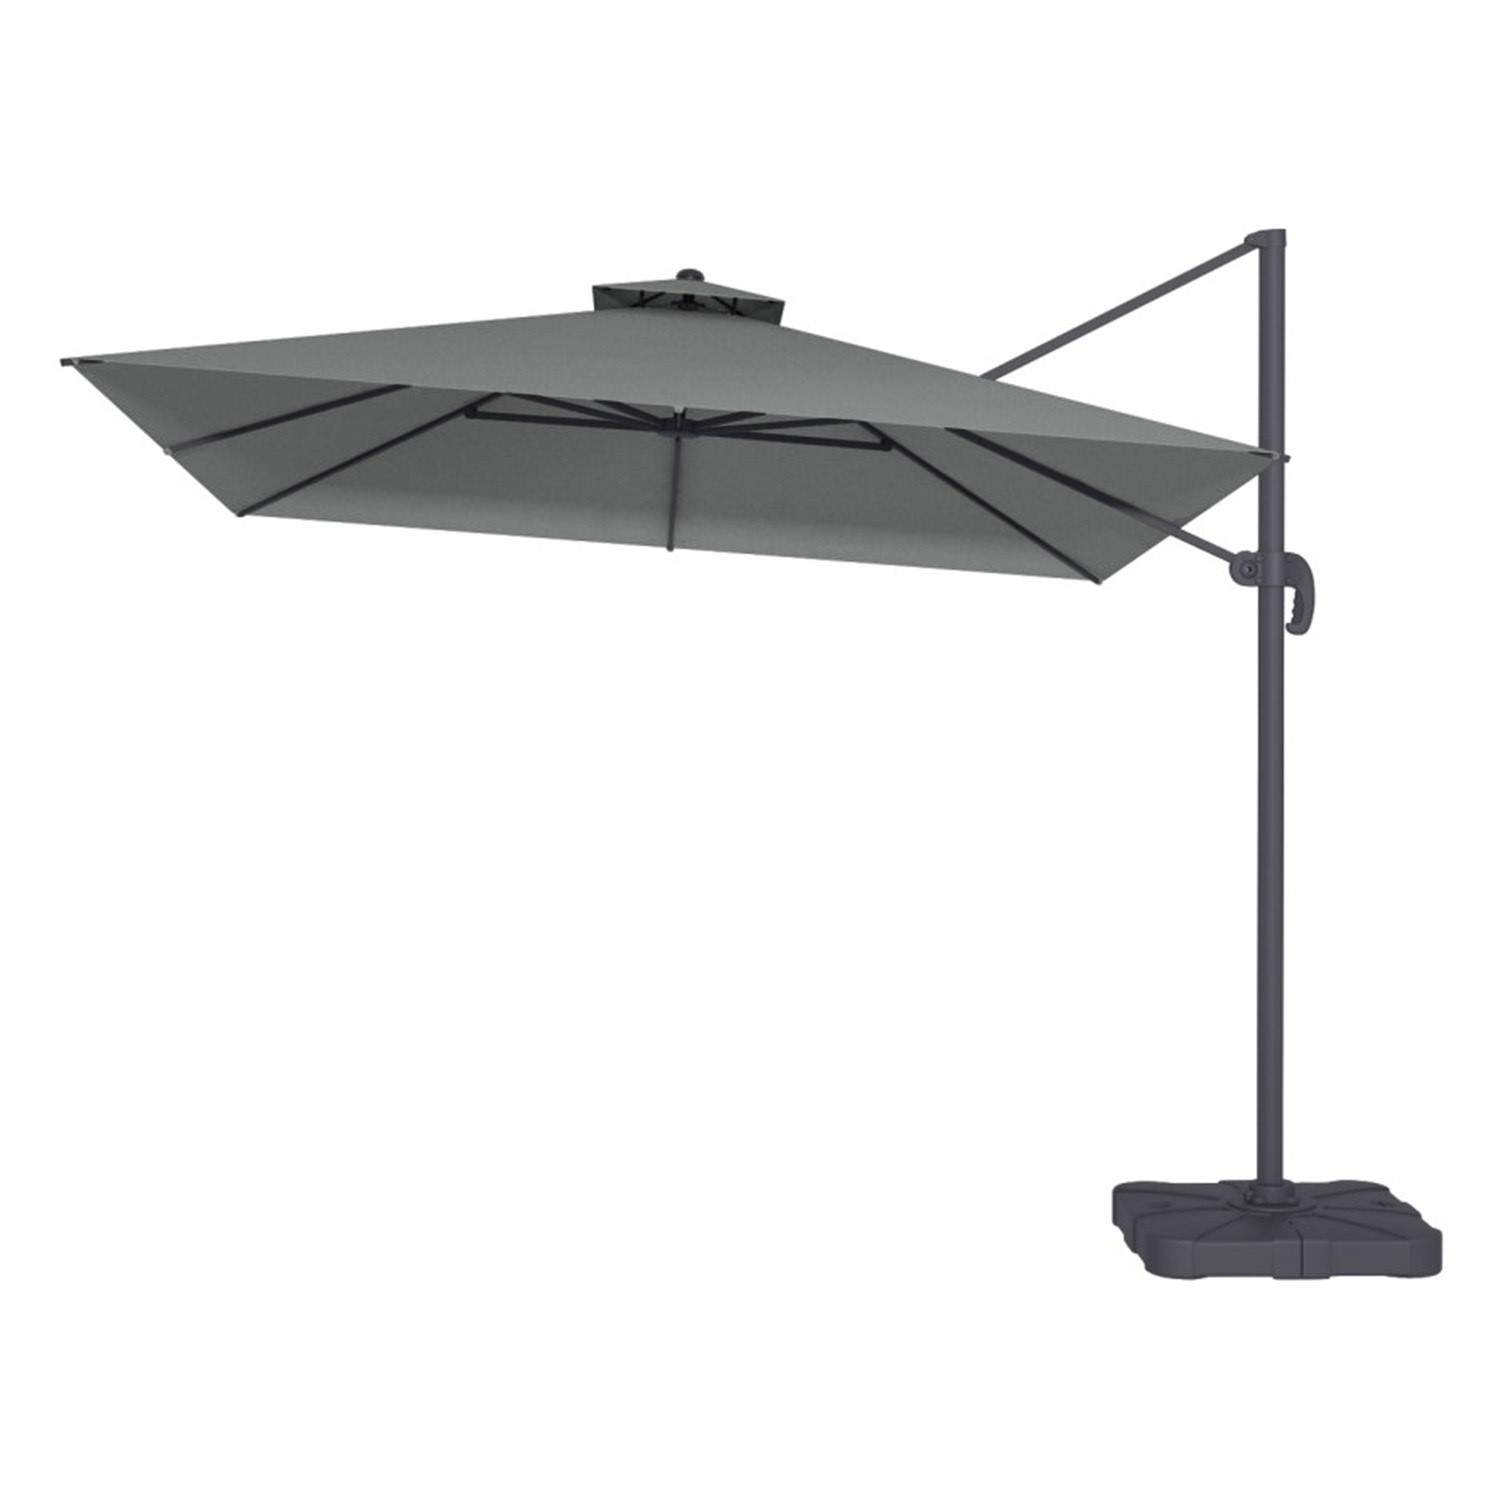 Read more about 3x3m grey square cantilever parasol with base and cover included como